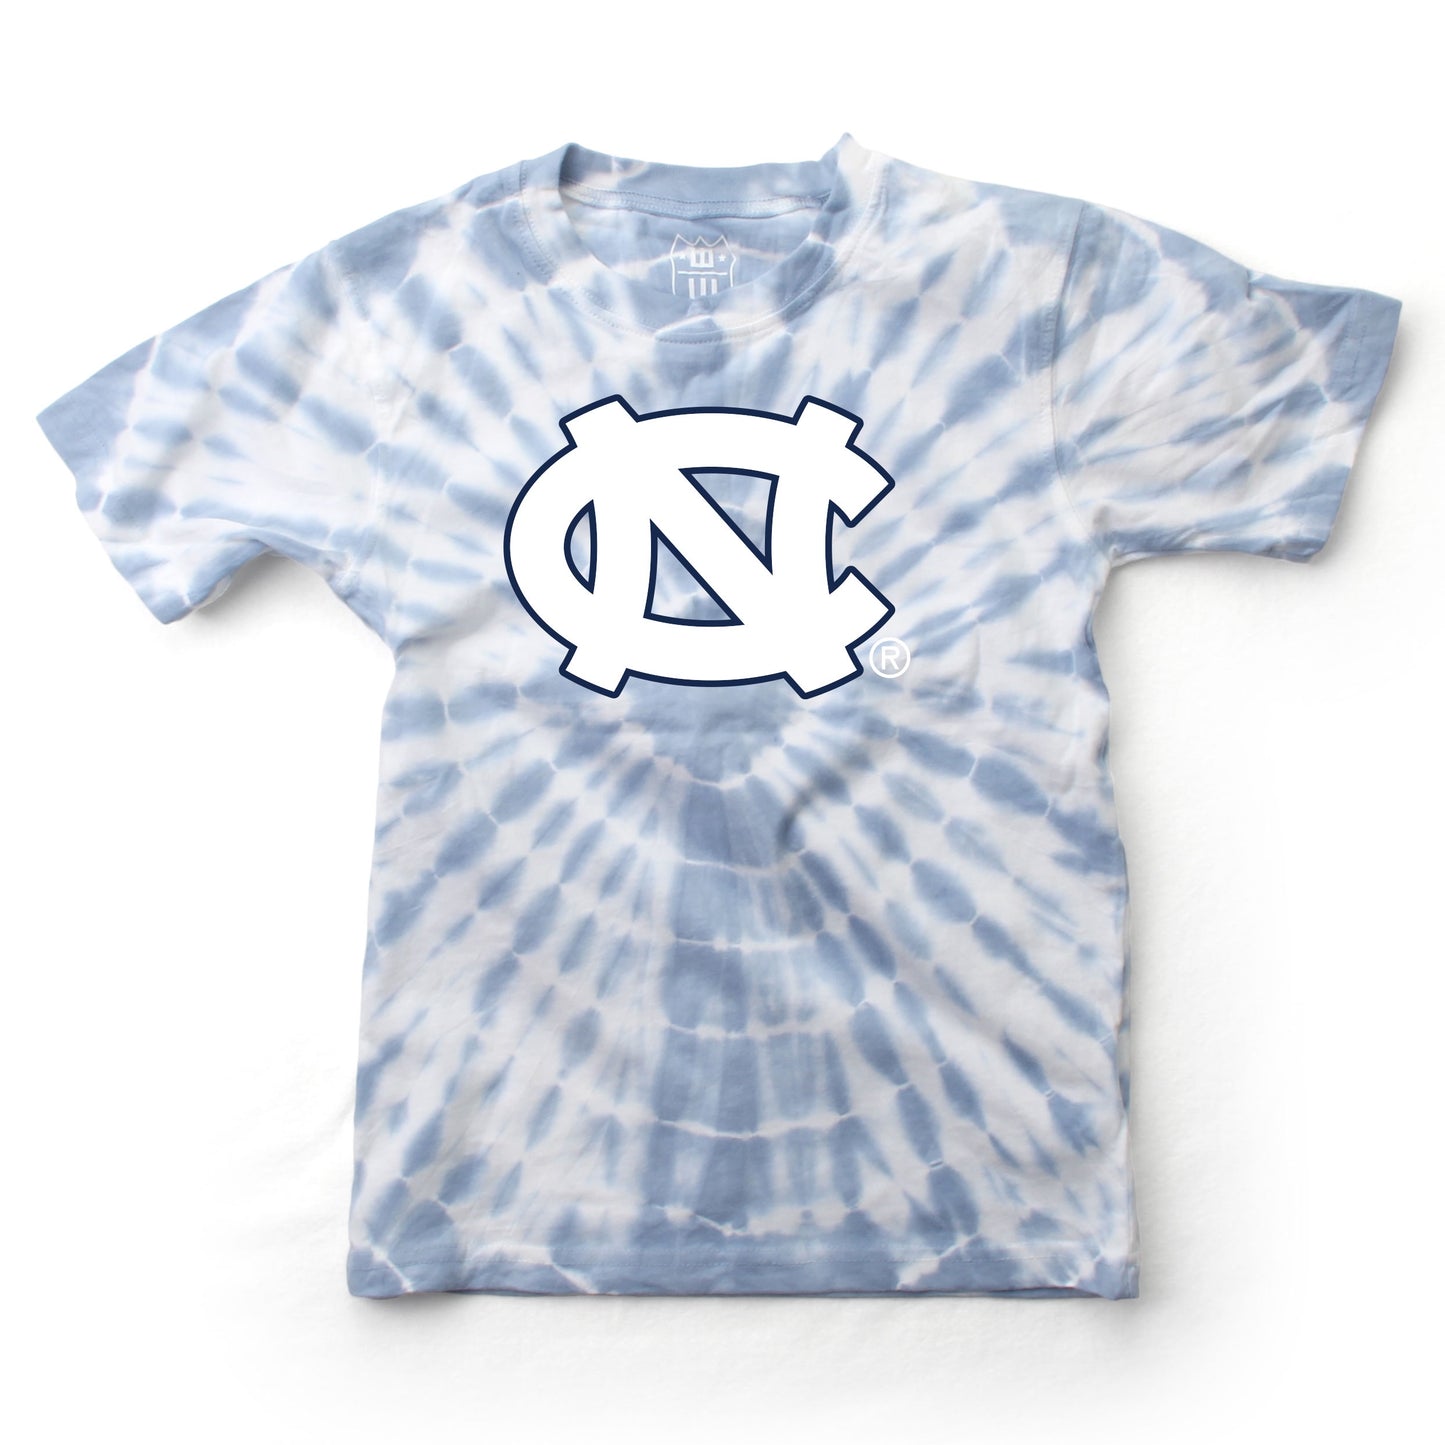 UNC Kid's Tie Dye T-Shirt by Wes and Willy